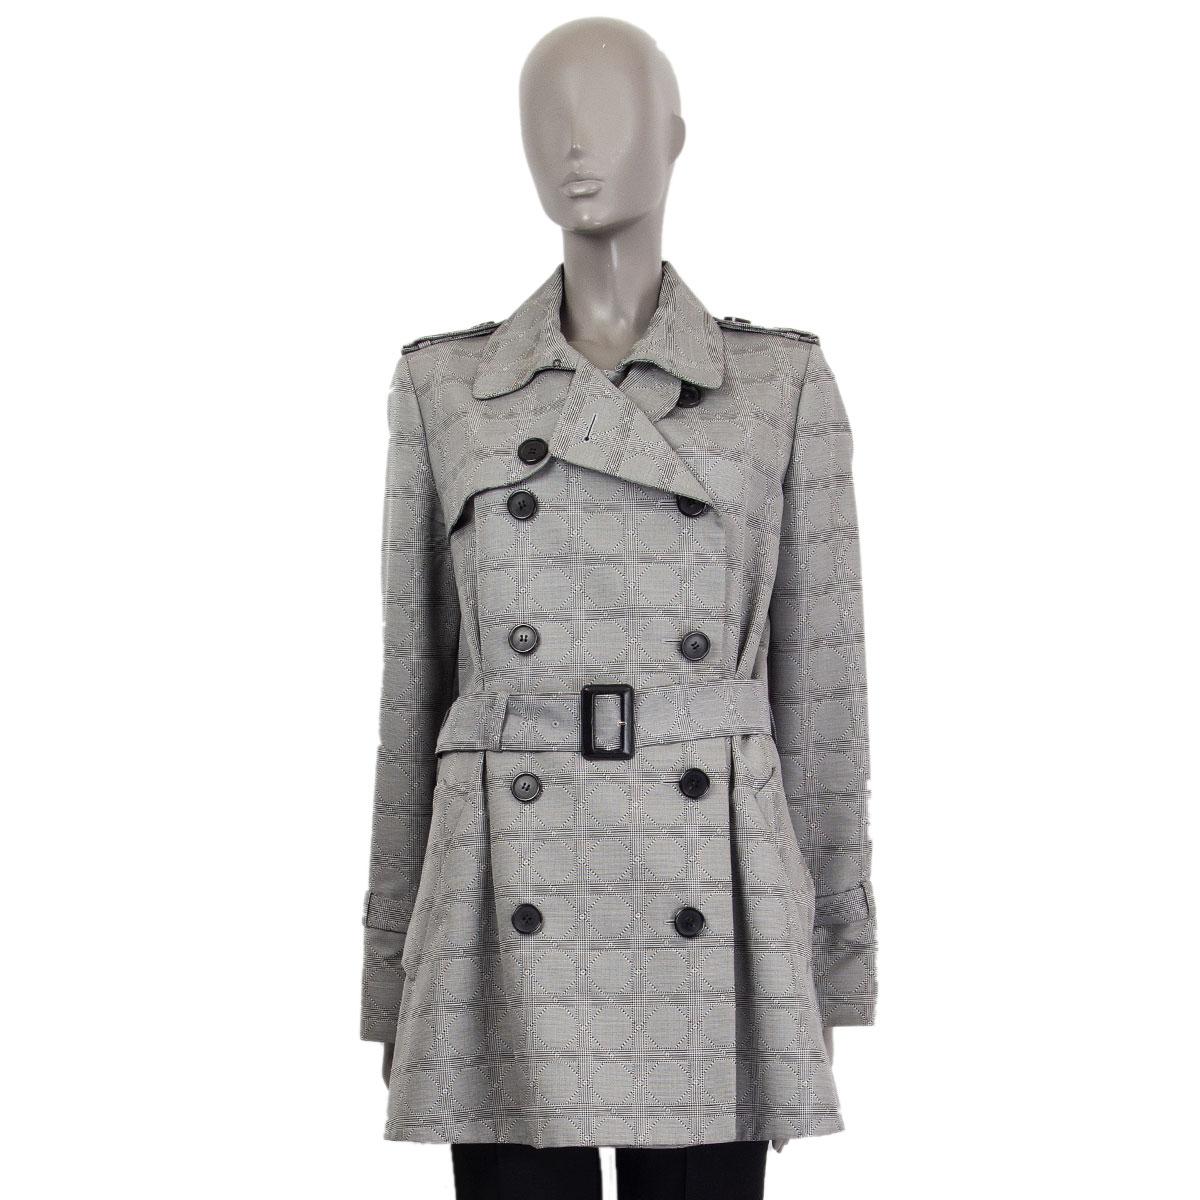 Christian Dior cannage trench coat in wool (73%) and silk (27%) with a flat collar, epaulettes and a matching belt with a black leather buckle. Cuffs have matching belts with black leather buckles. Closes on the front with buttons. Lined in silk